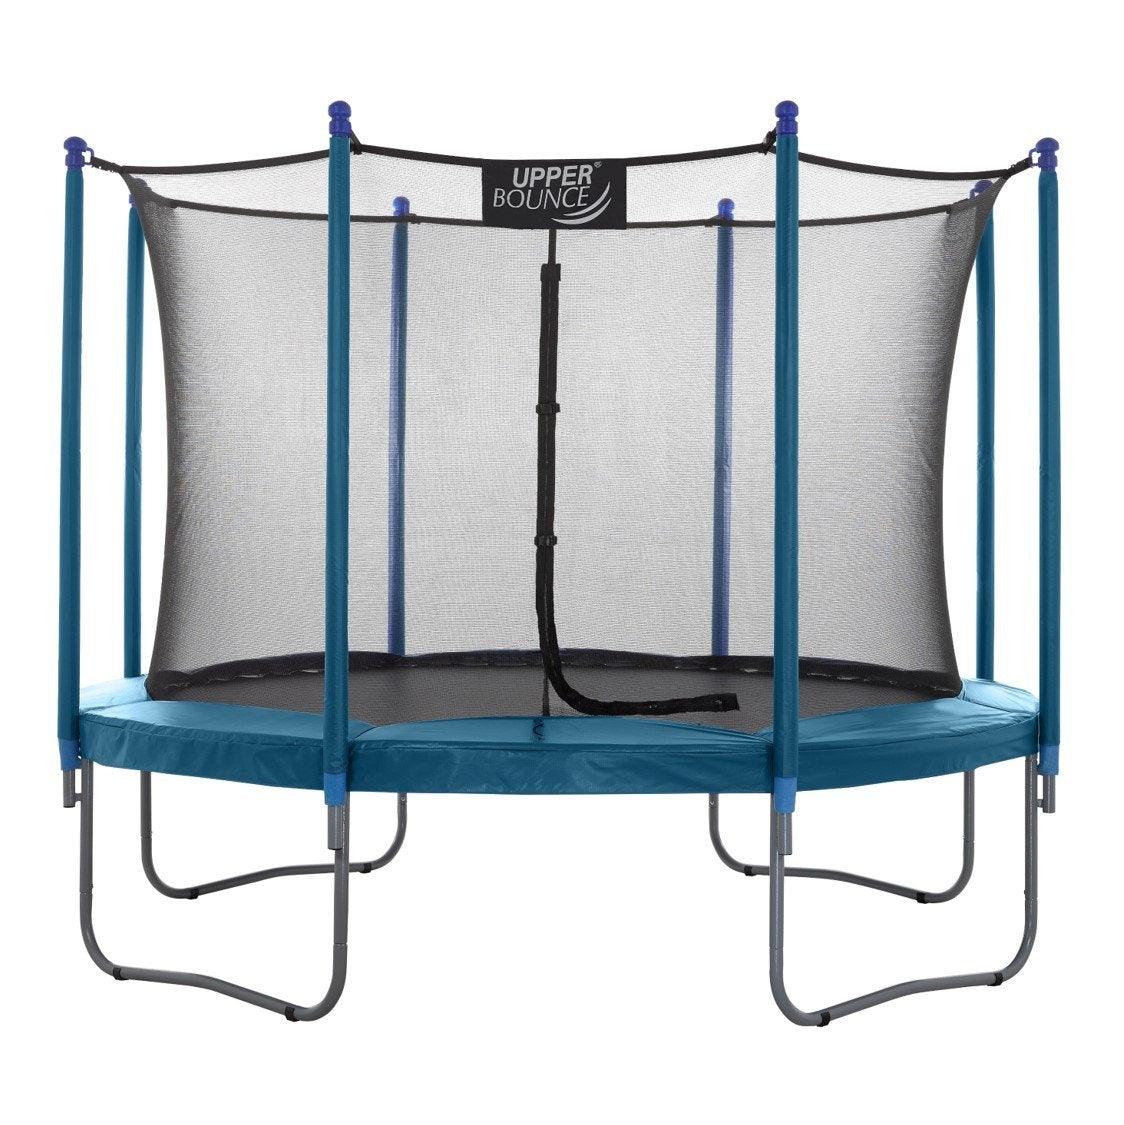 Machrus Upper Bounce 16 FT Round Trampoline Set with Safety